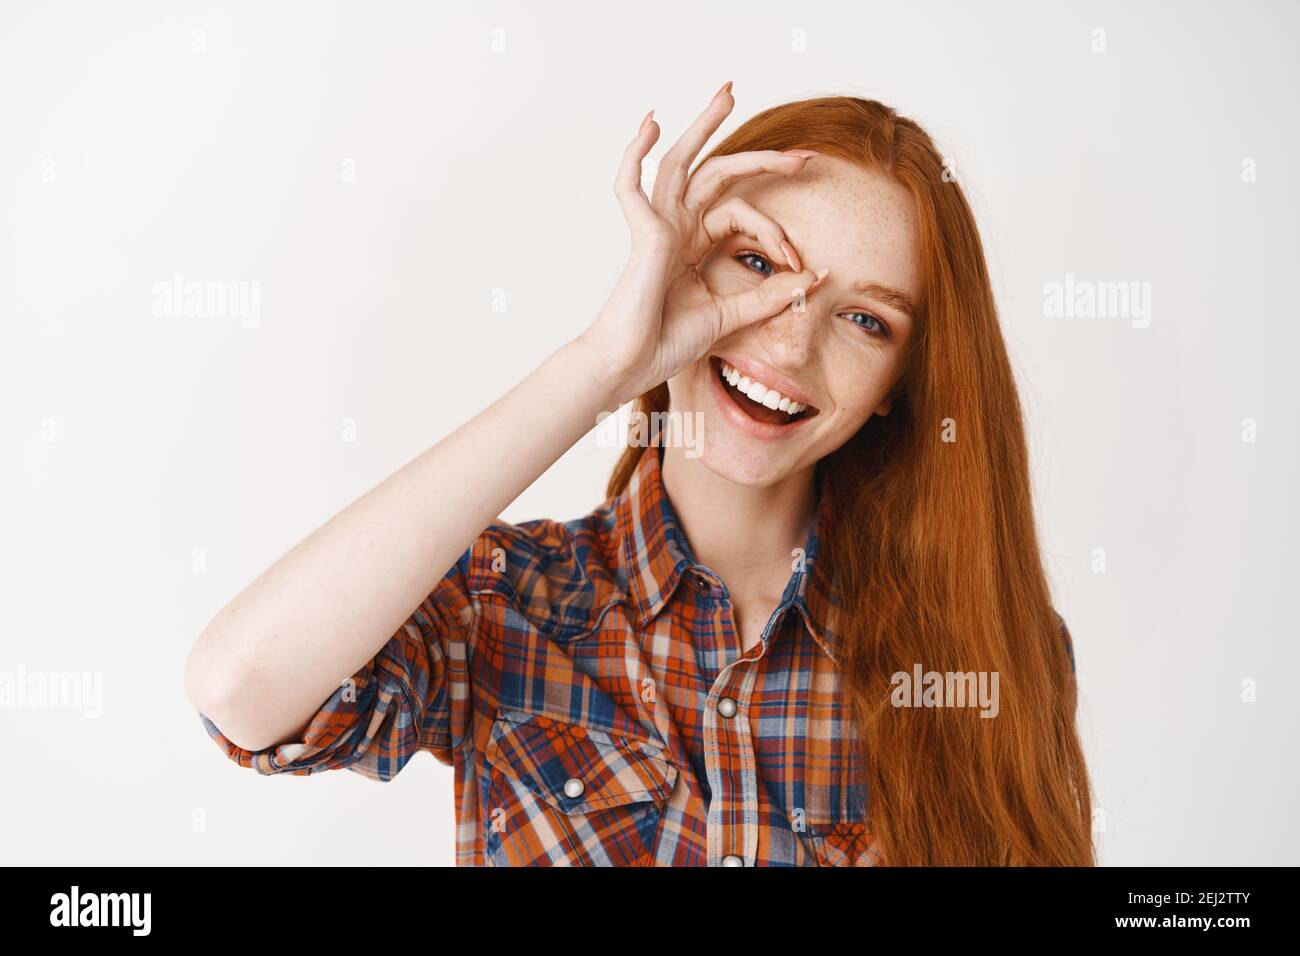 Close-up of beautiful redhead woman smiling with white teeth, showing okay sign and looking happy, standing over white background Stock Photo